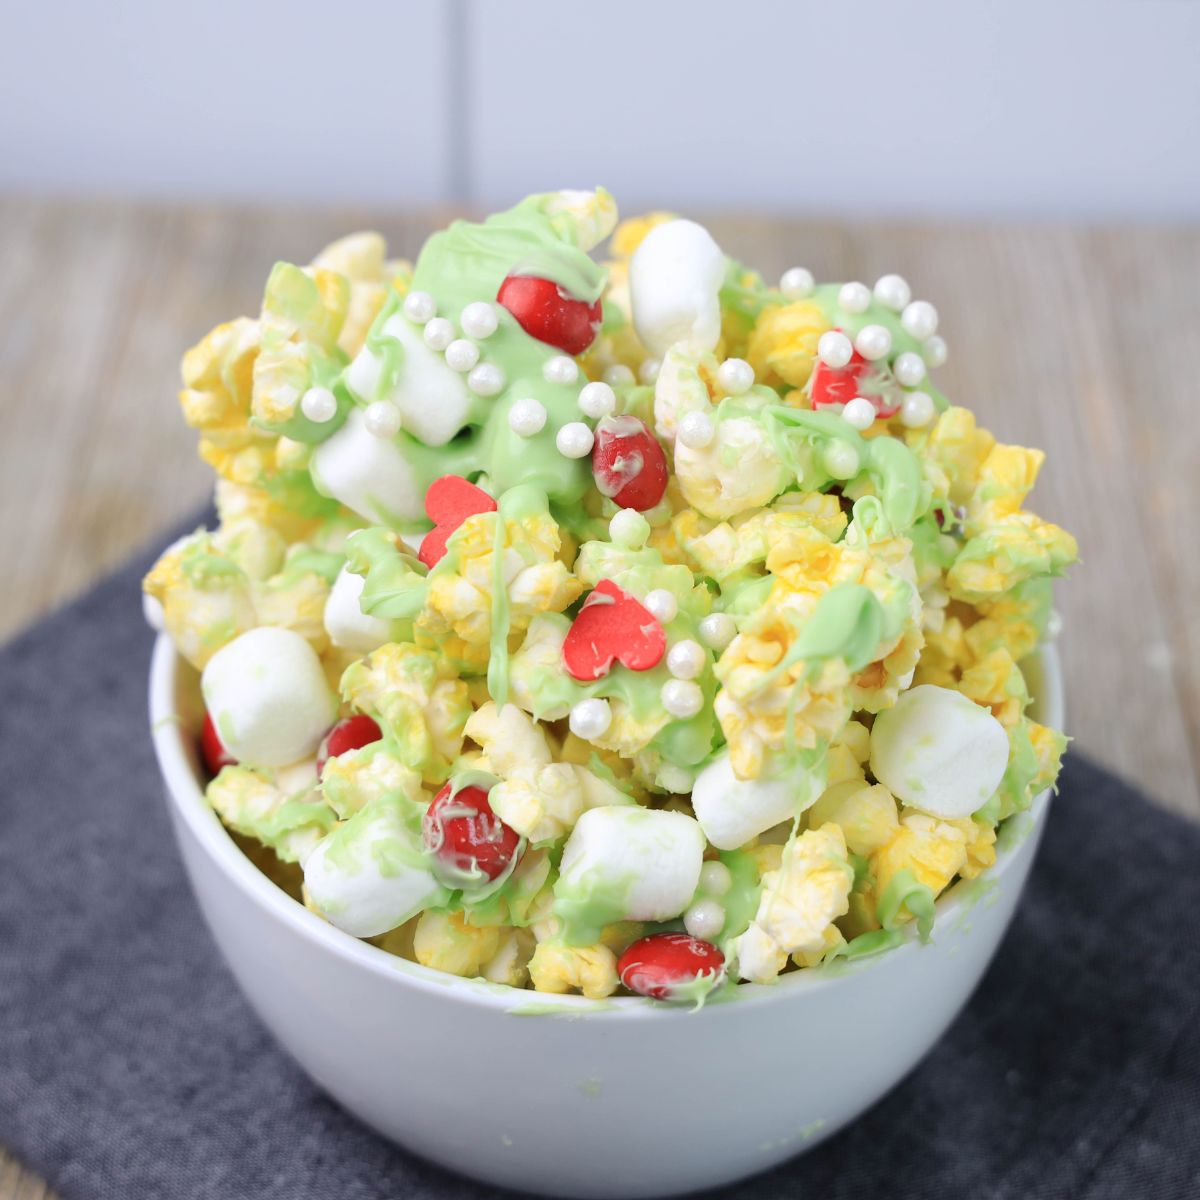 A bowl of popcorn with green icing and marshmallows.